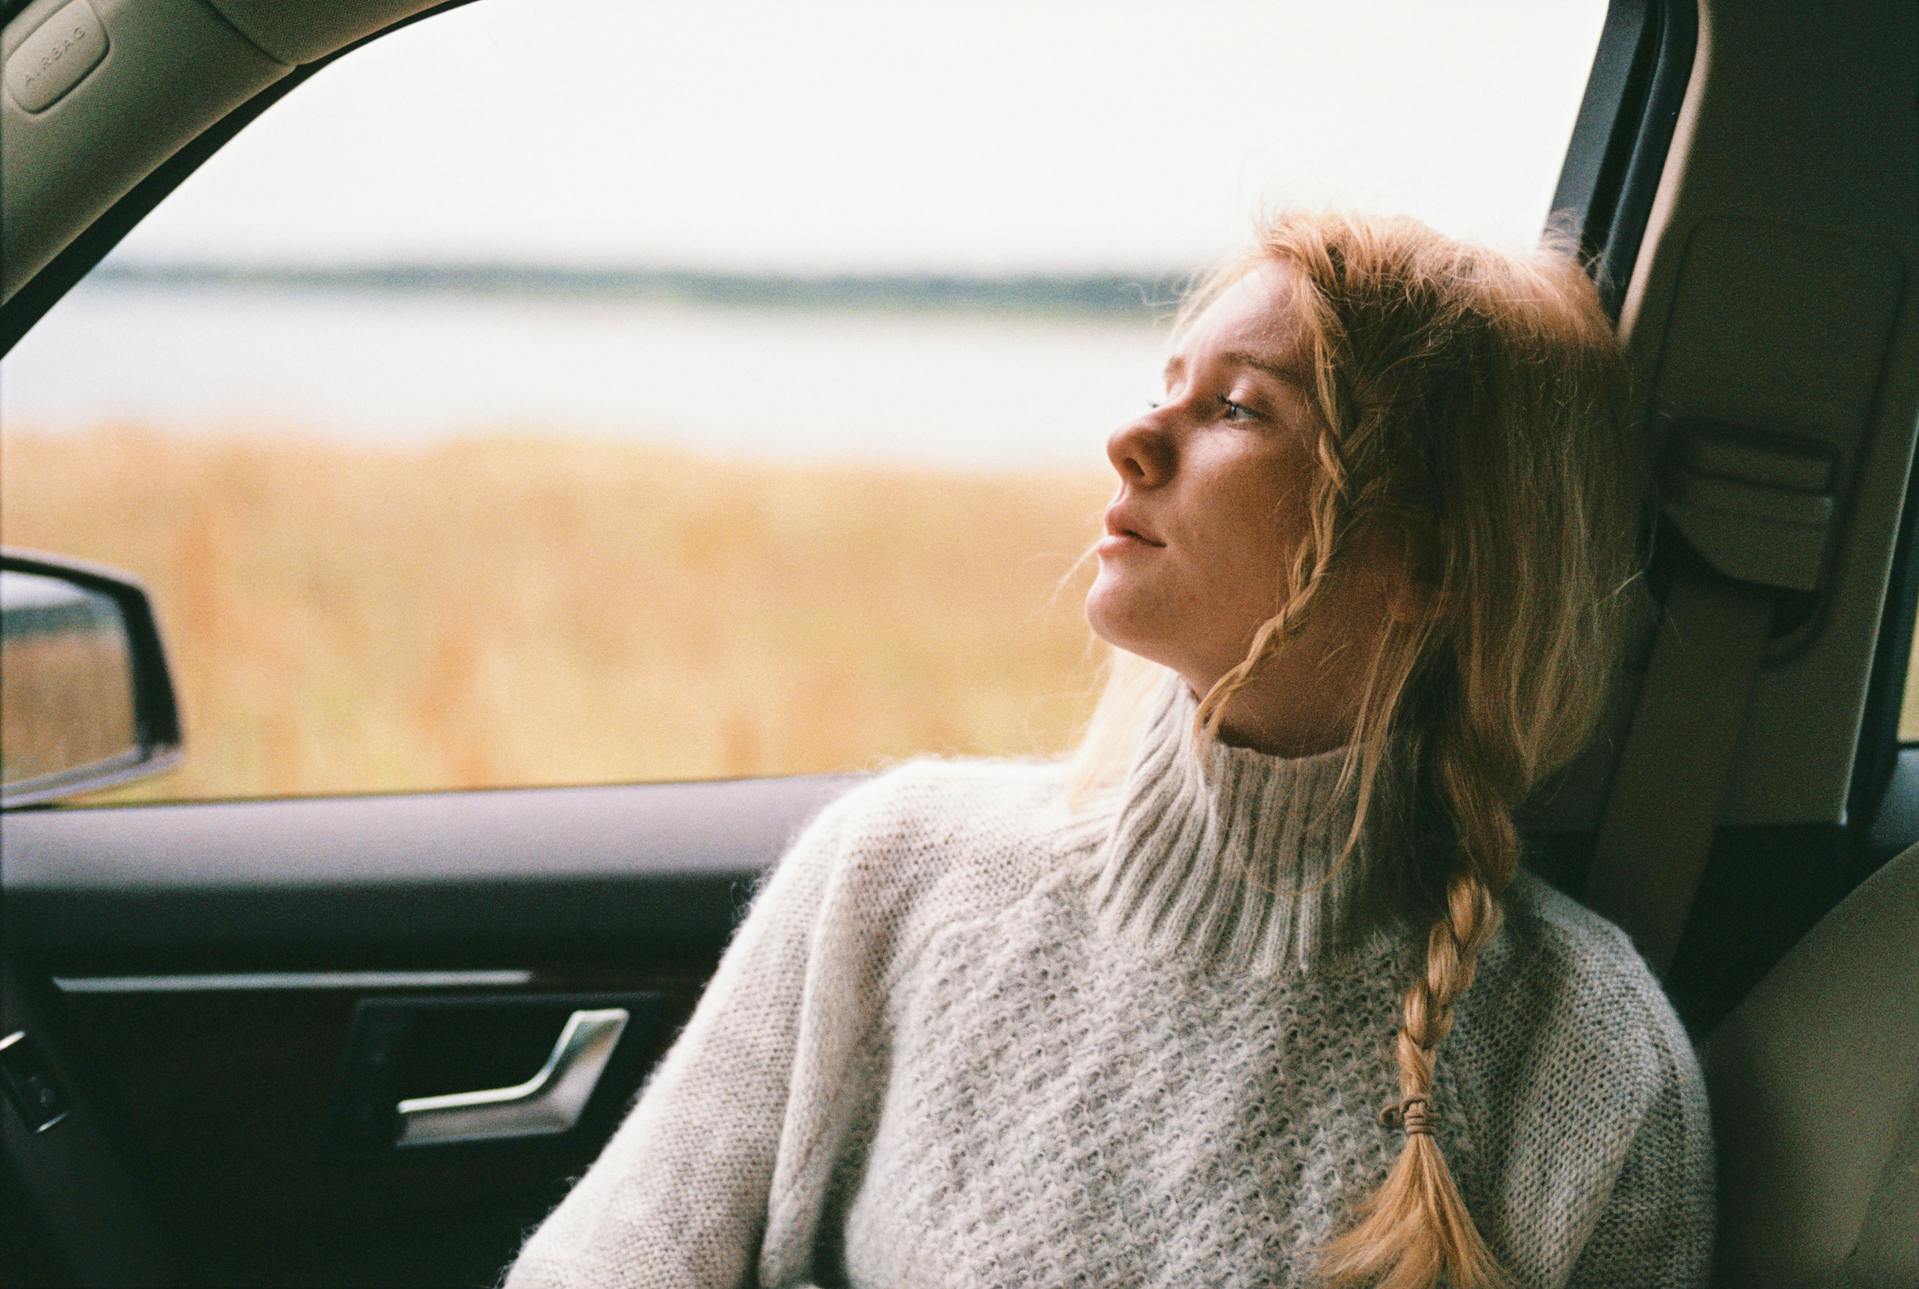 A woman in a sweater sitting inside a car and thinking | Source: Pexels